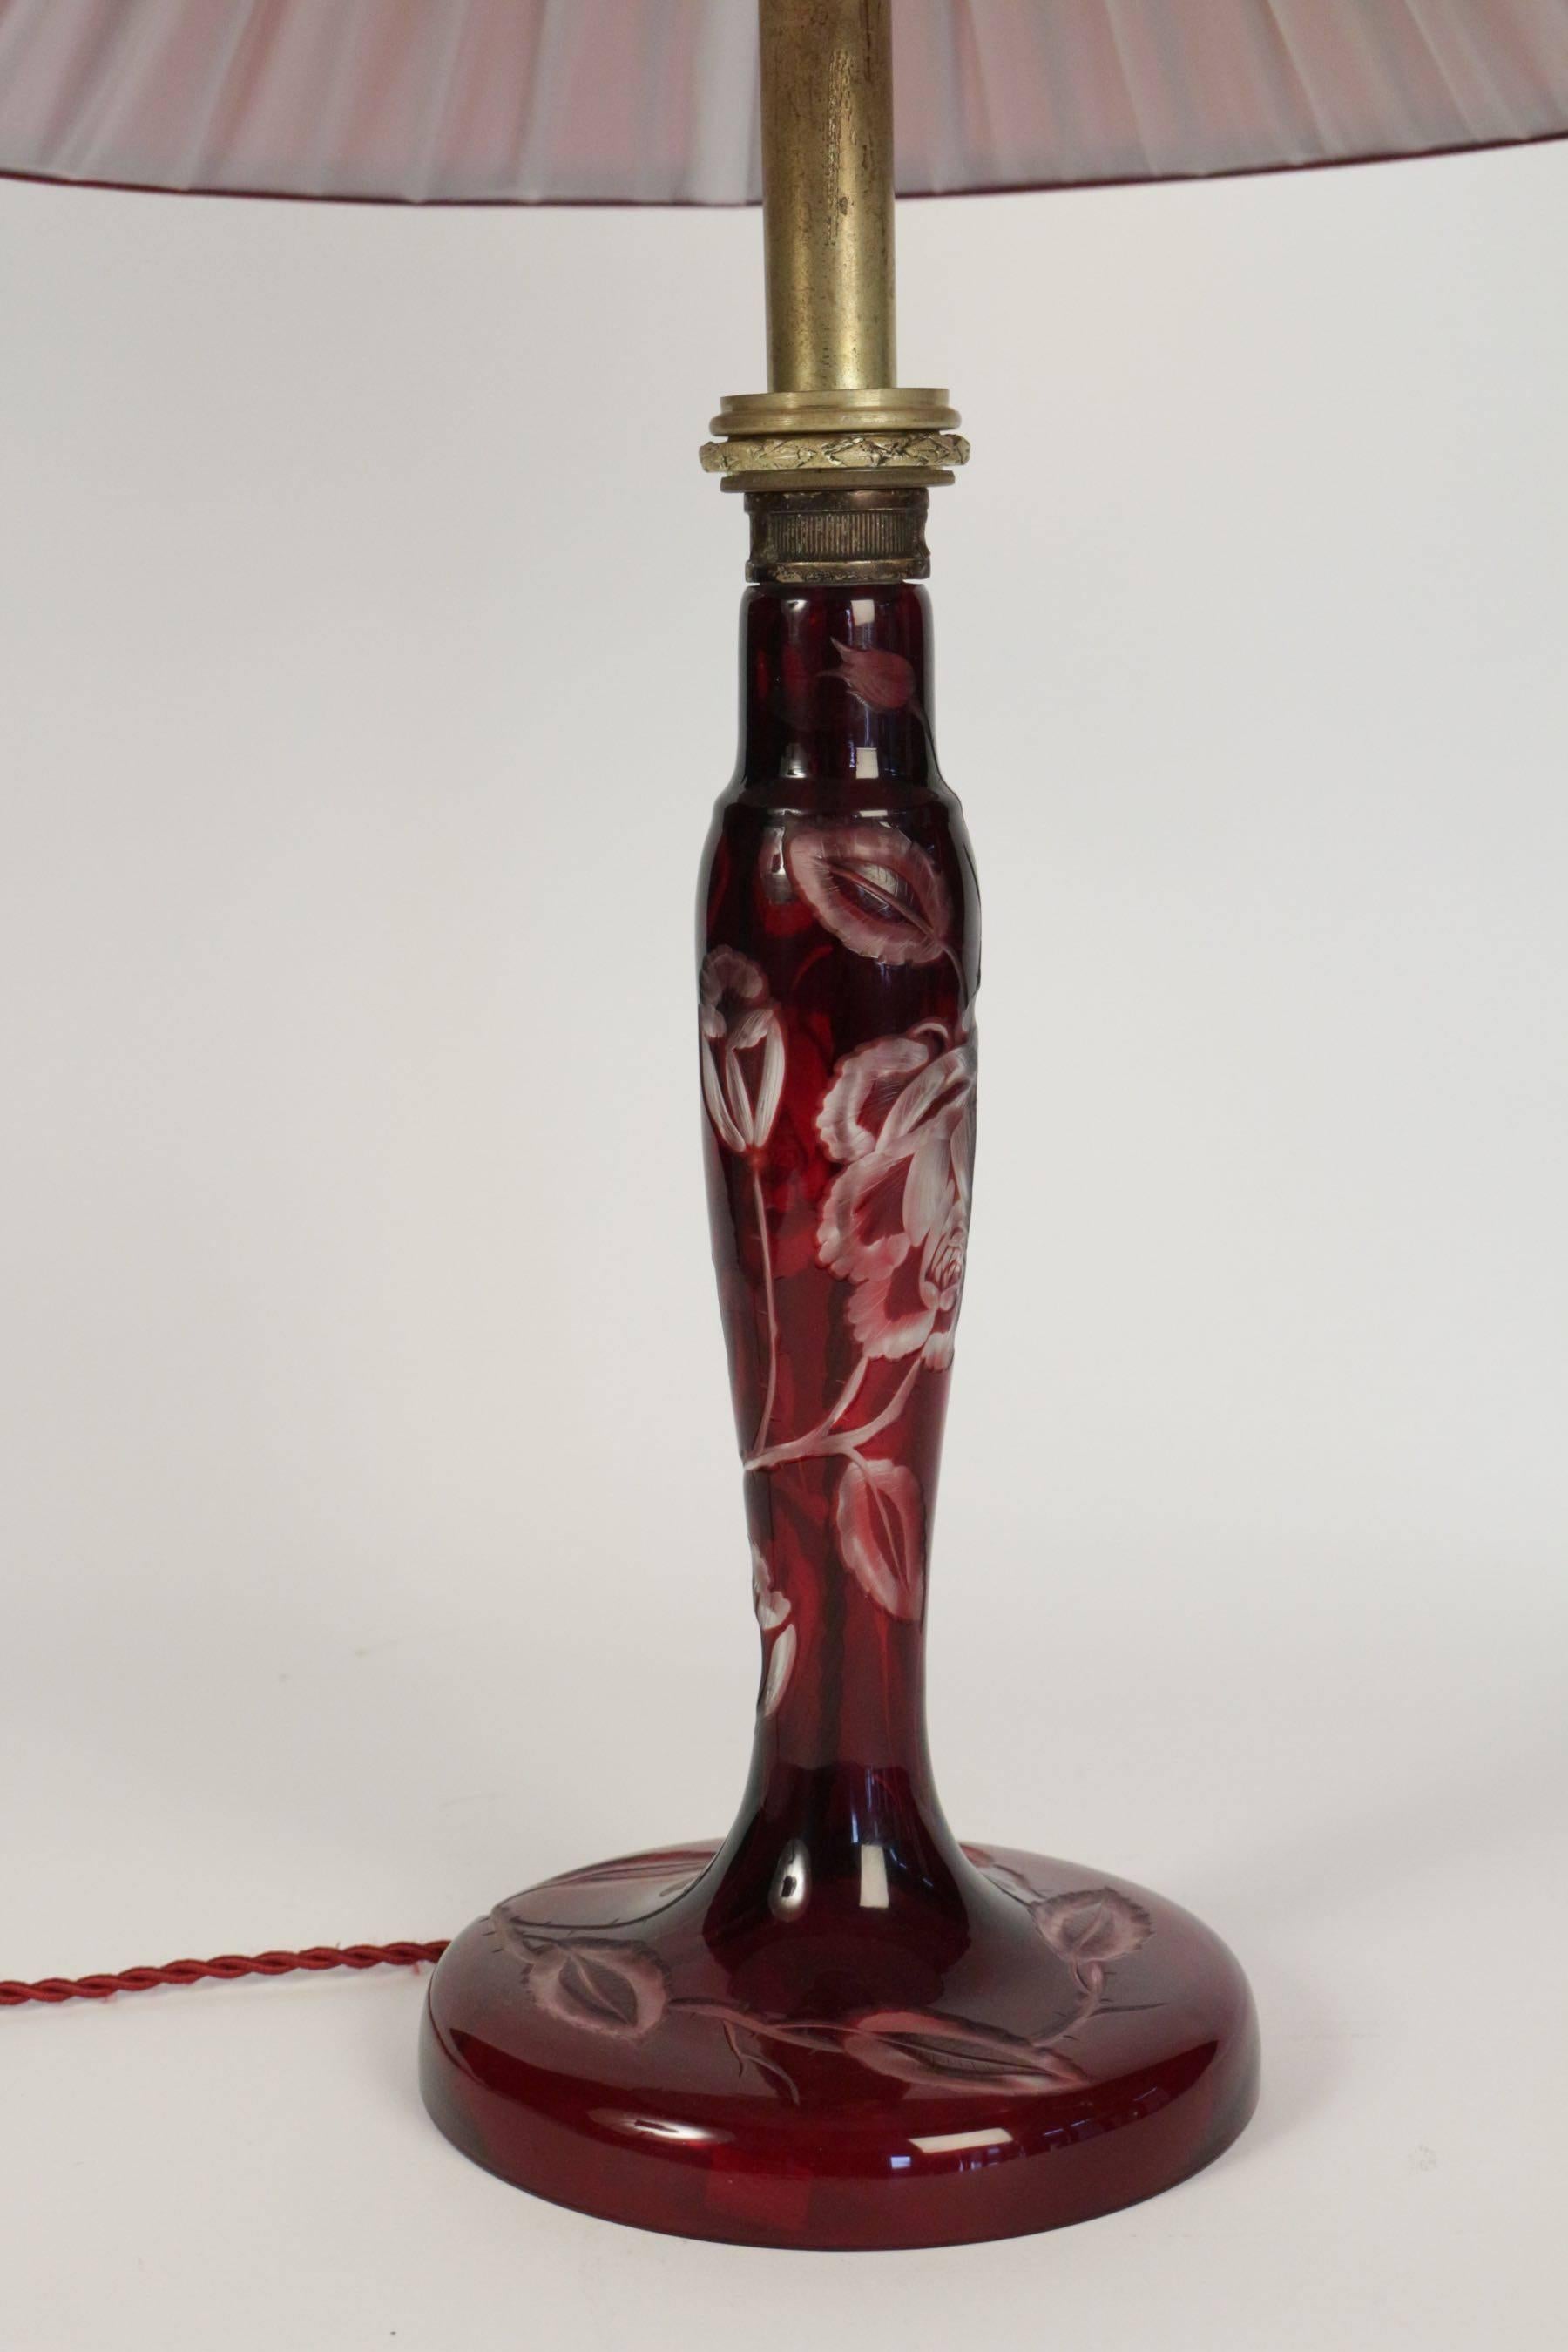 French Beautiful Art Nouveau Table Lamp in Etched Burgundy Colored Glass, circa 1900